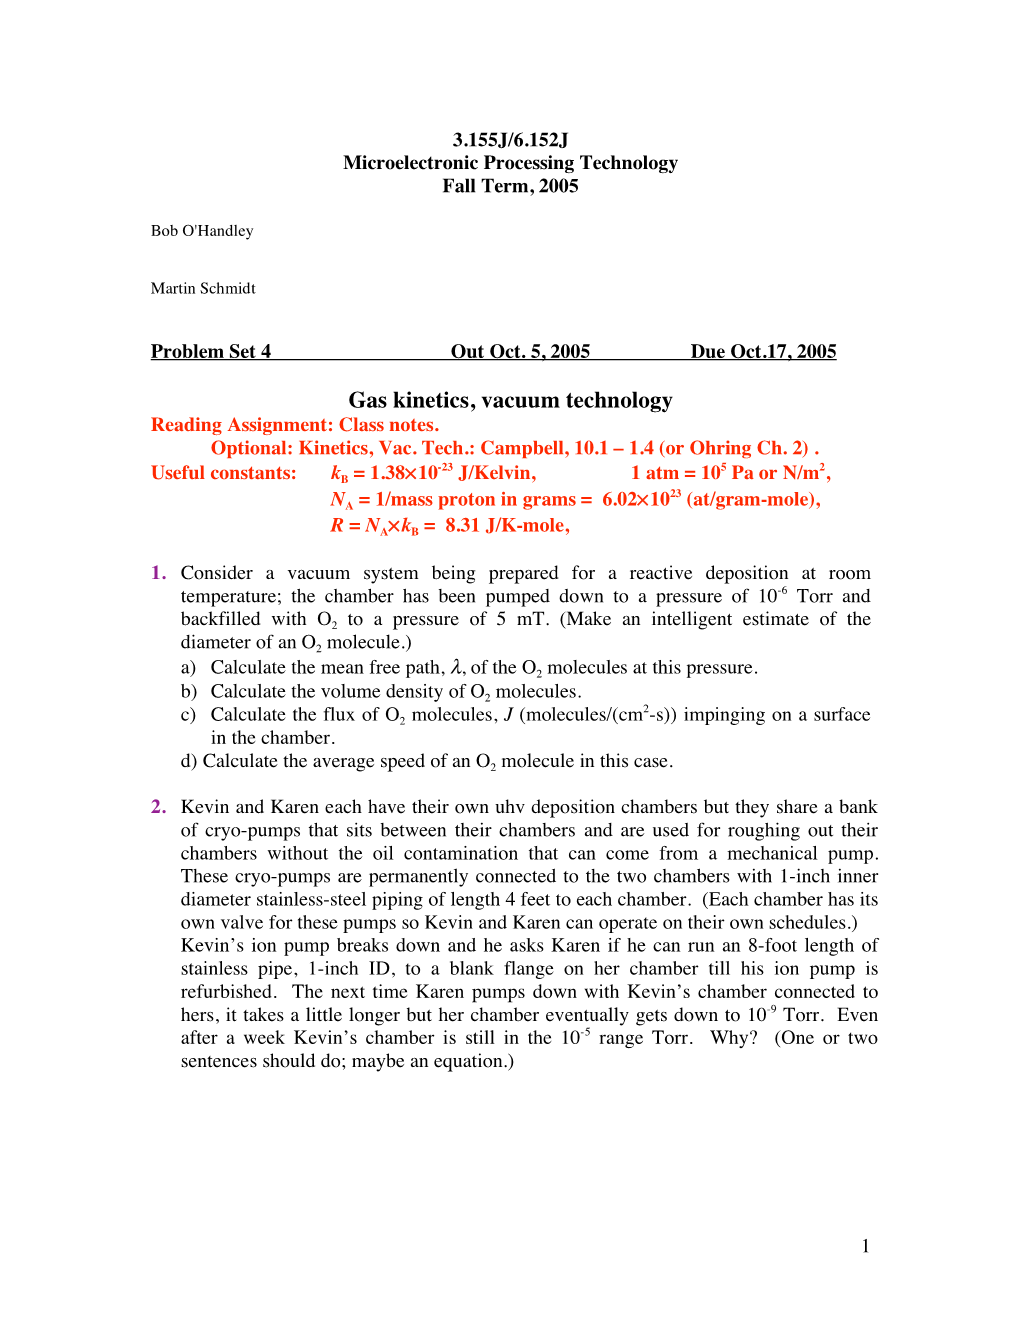 Gas Kinetics, Vacuum Technology Reading Assignment: Class Notes